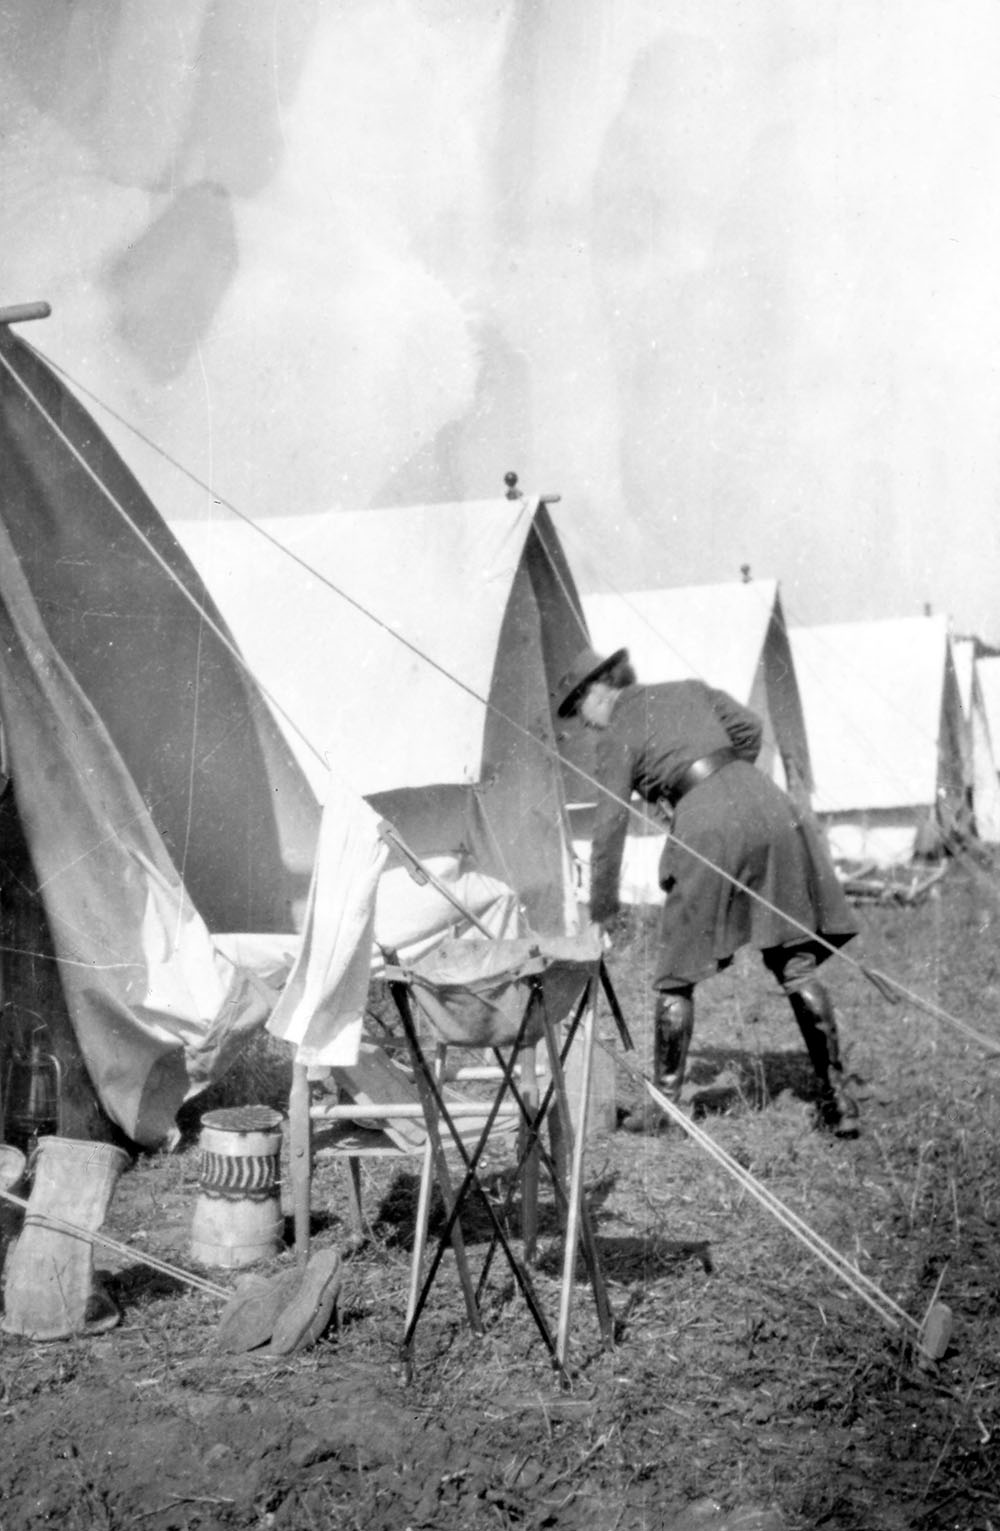 A field of tents with an orderly and washstand in the foreground, possibly in Medjidia the Russian HQ of the Scottish Women’s Hospitals in the Dobrudja district of Romania.